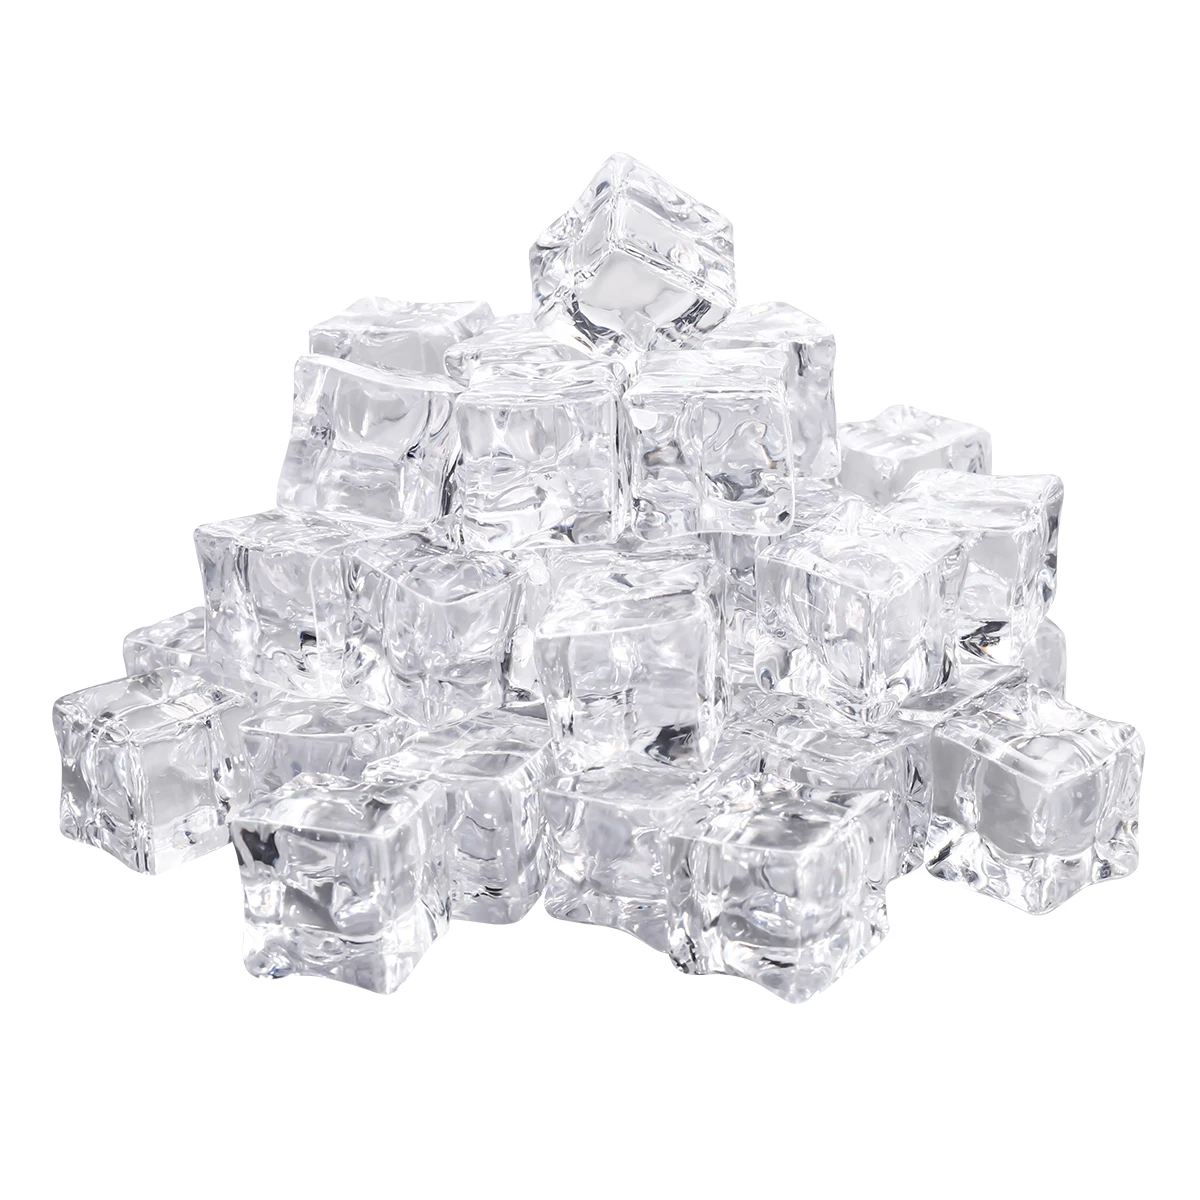 50Pcs Fake Ice Cube Acrylic Artificial Square Shape Vase Fillers Crystal Cubes Acrylic Play Kitchen Artificial Ice Cubes